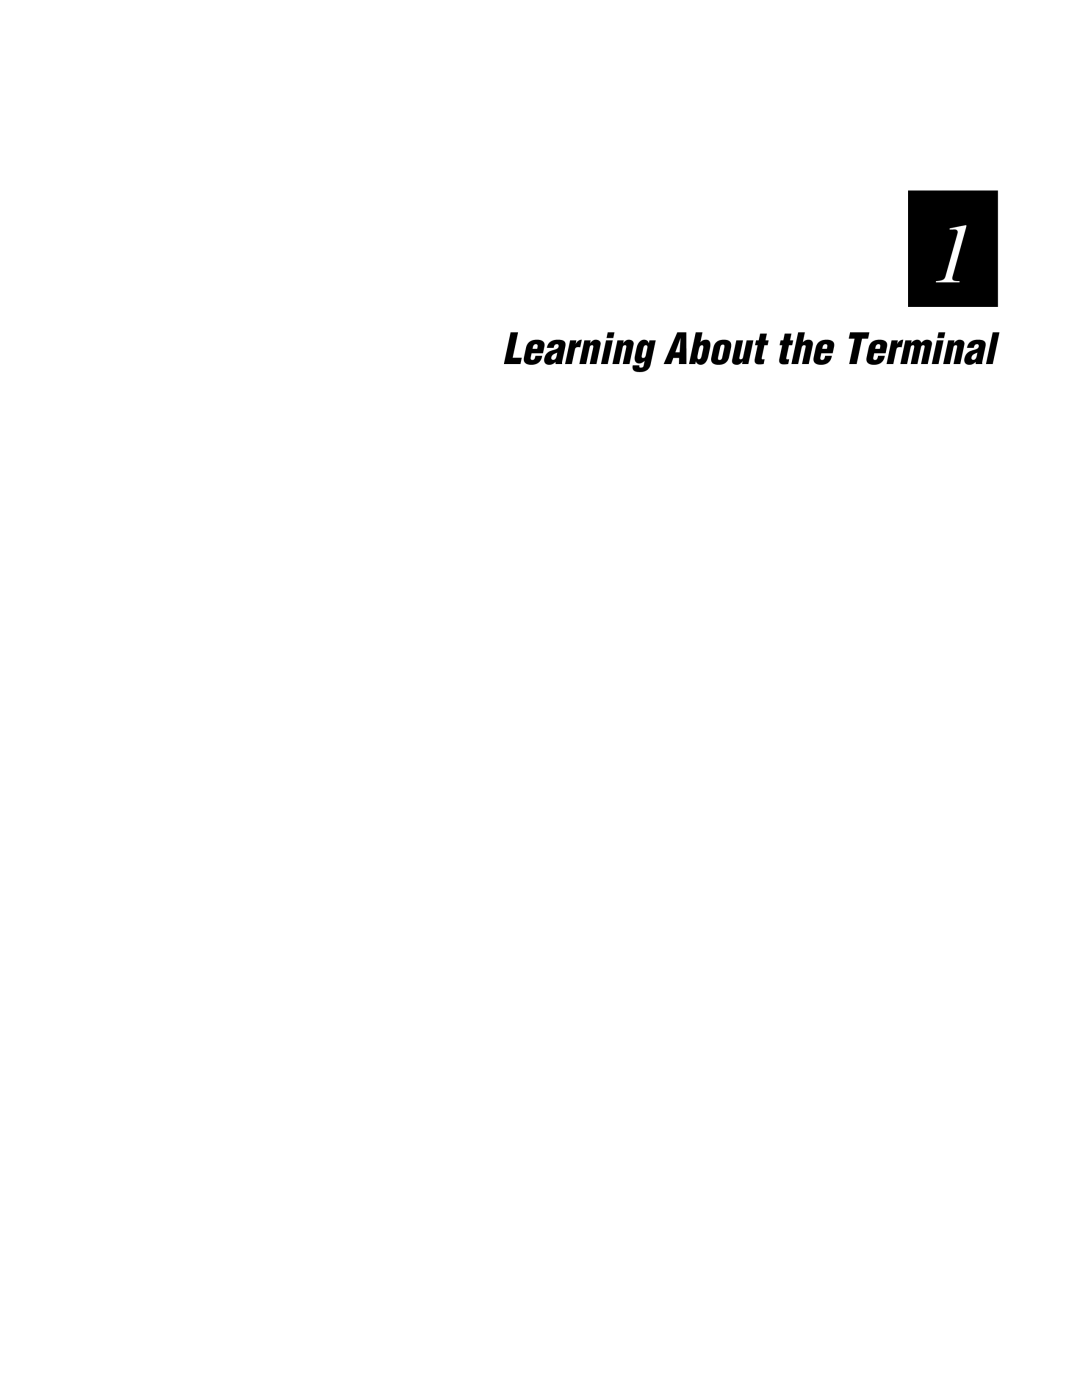 IBM 243X user manual Learning About the Terminal 